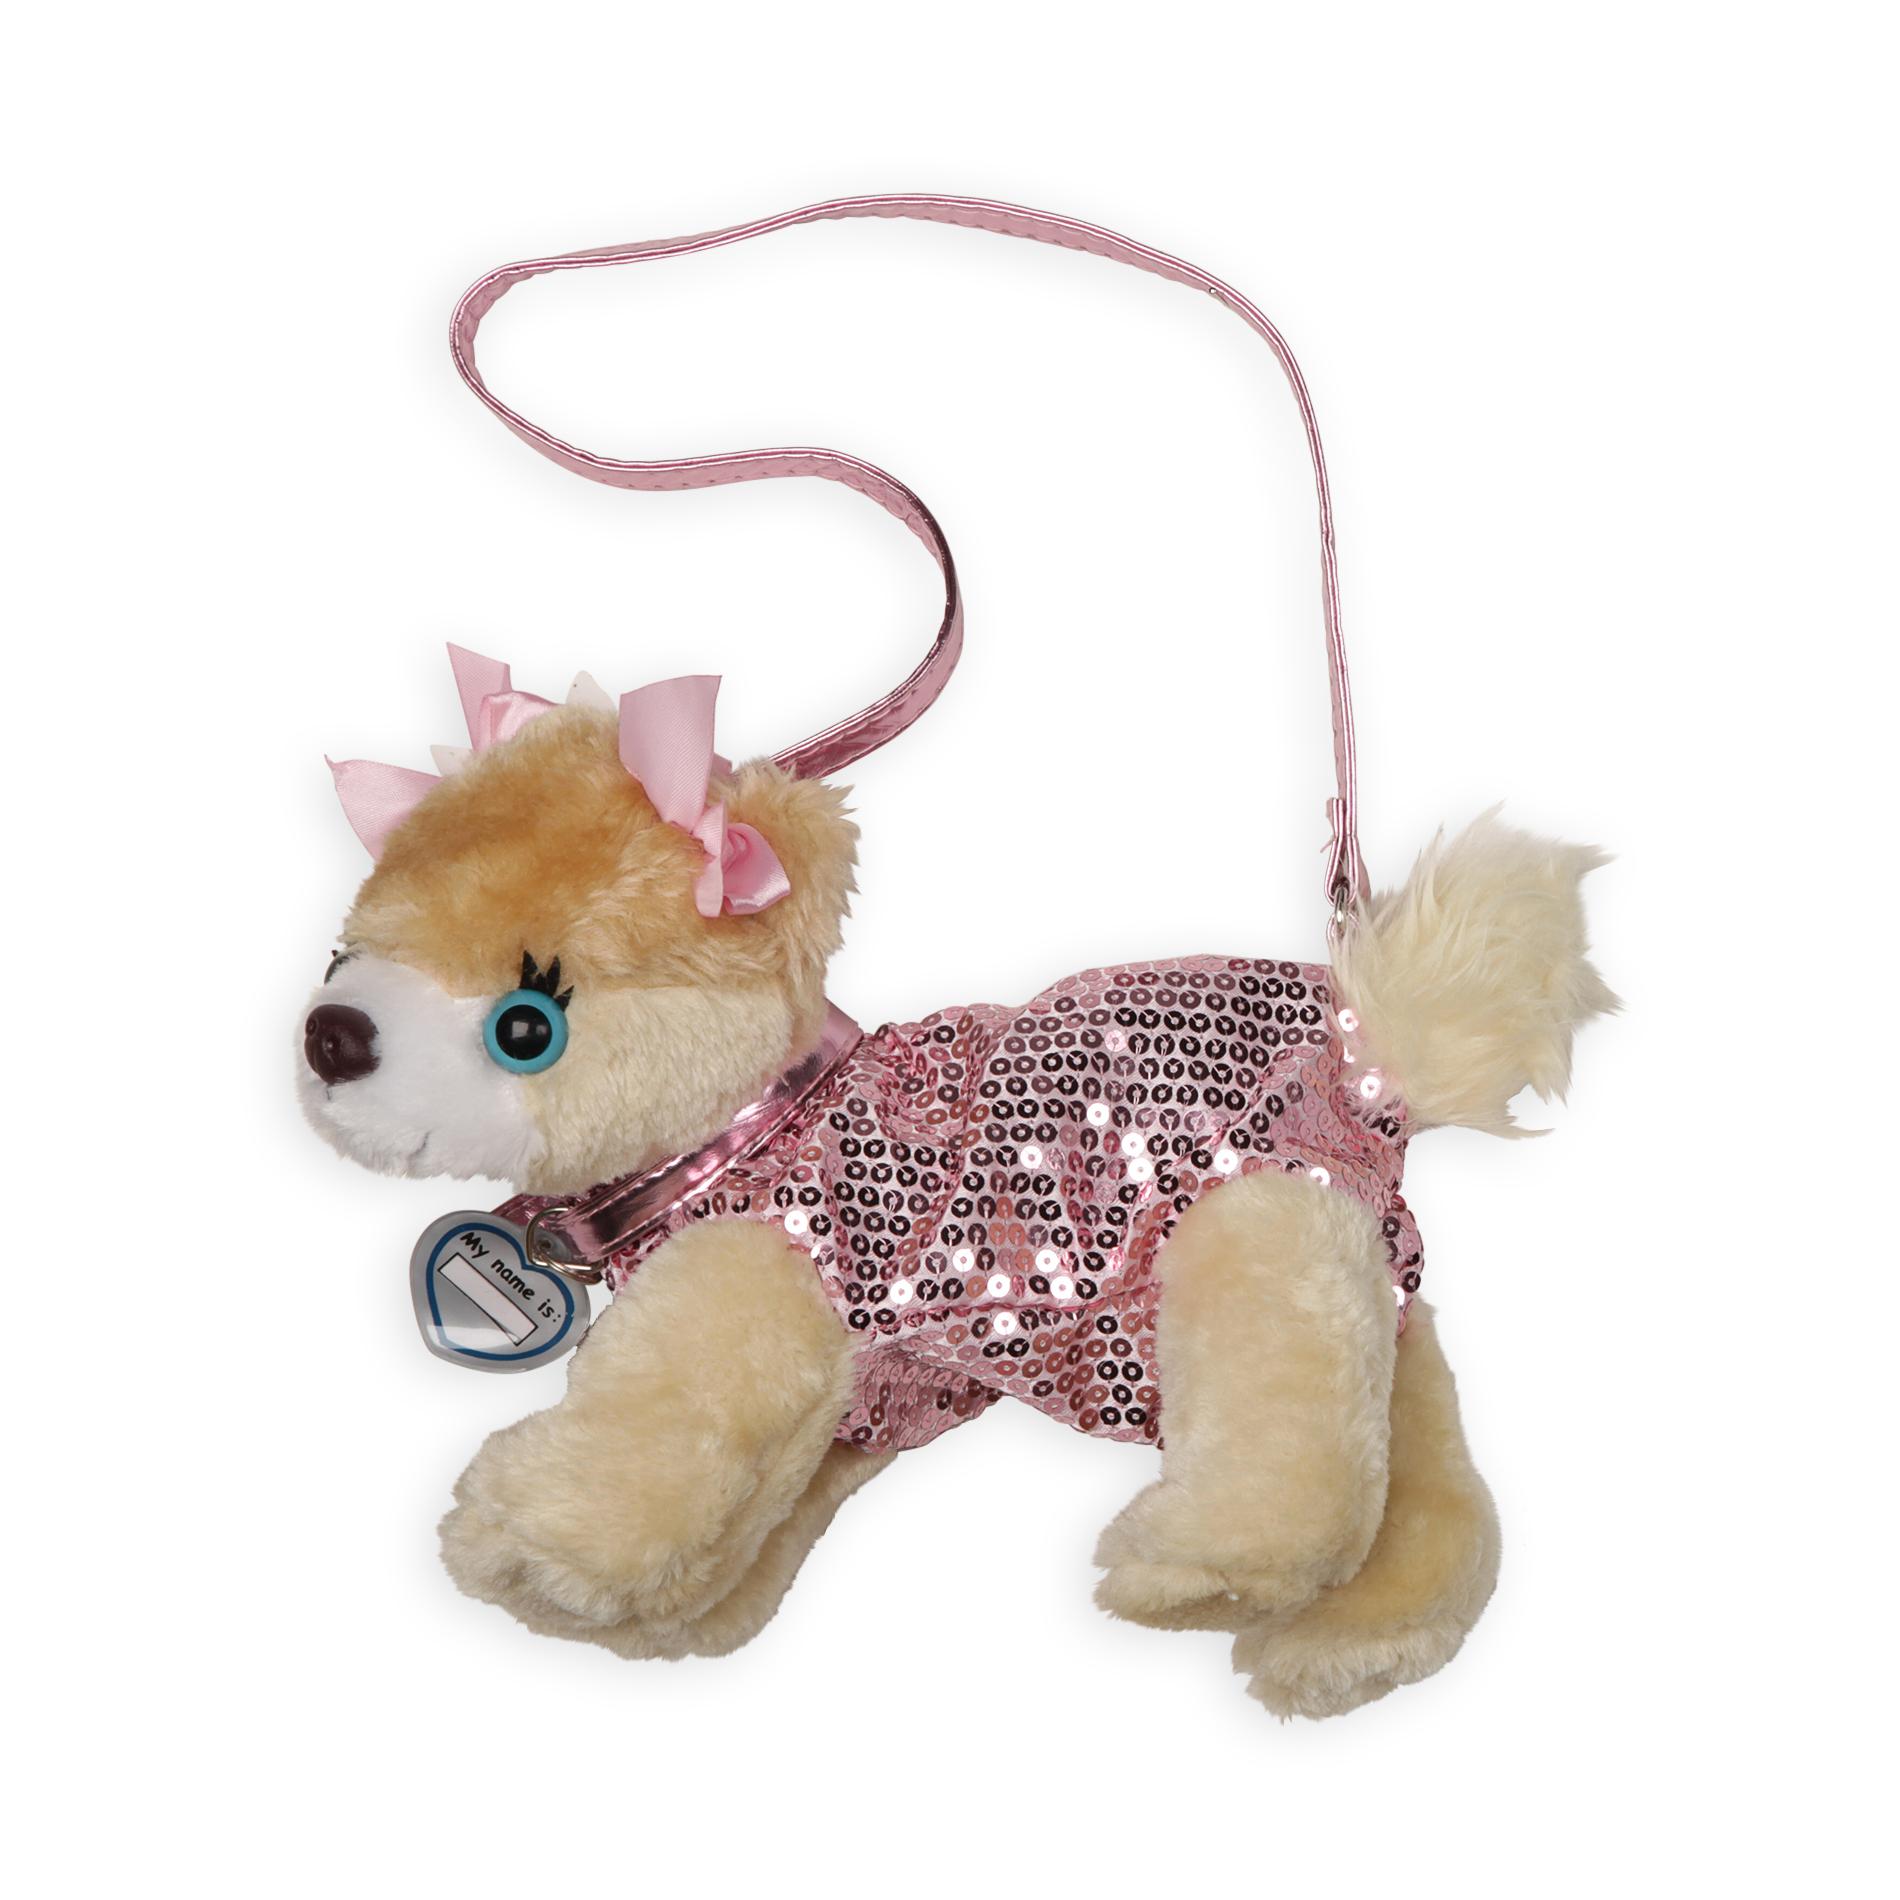 Poochie & Co. Girl's Plush Sequined Purse - Poodle